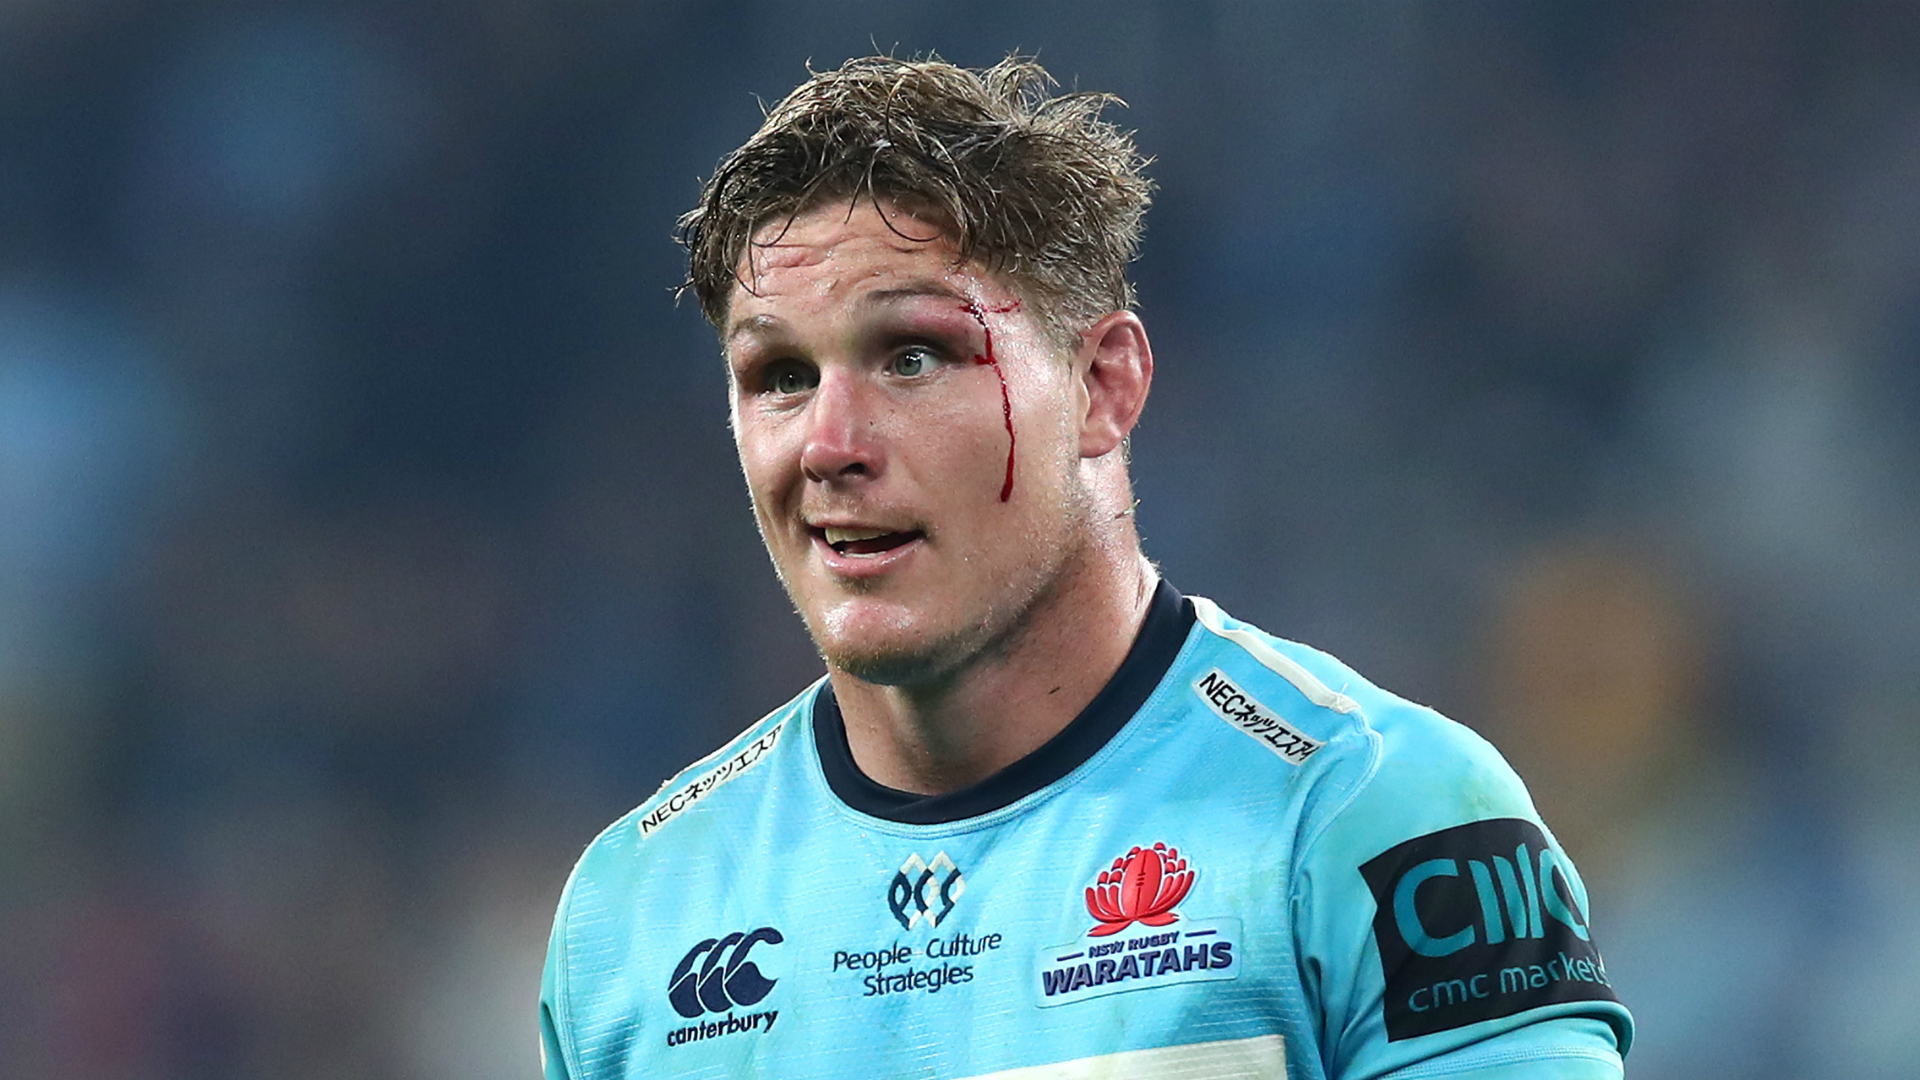 The Waratahs have a new skipper in place ahead of their season opener against the Crusdaers on February 1.